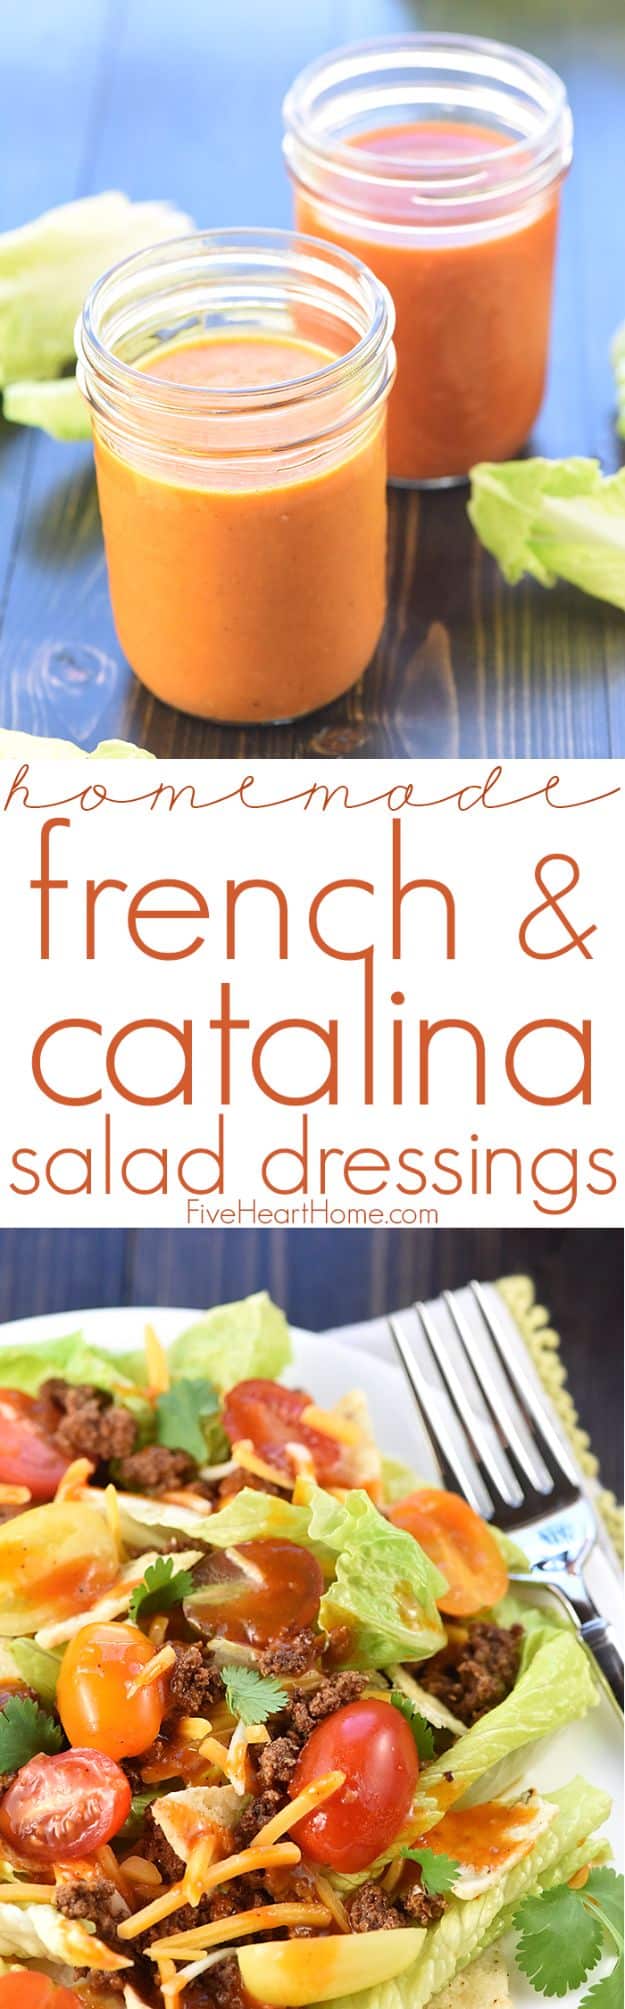 Salad Dressing Recipes - Homemade French & Catalina Salad Dressing - Healthy, Low Calorie and Easy Recipes for Creamy Homeade Dressings - How To Make Vinaigrette, Mango, Greek, Paleo, Balsamic, Ranch, and Italian Copycat Dressings 